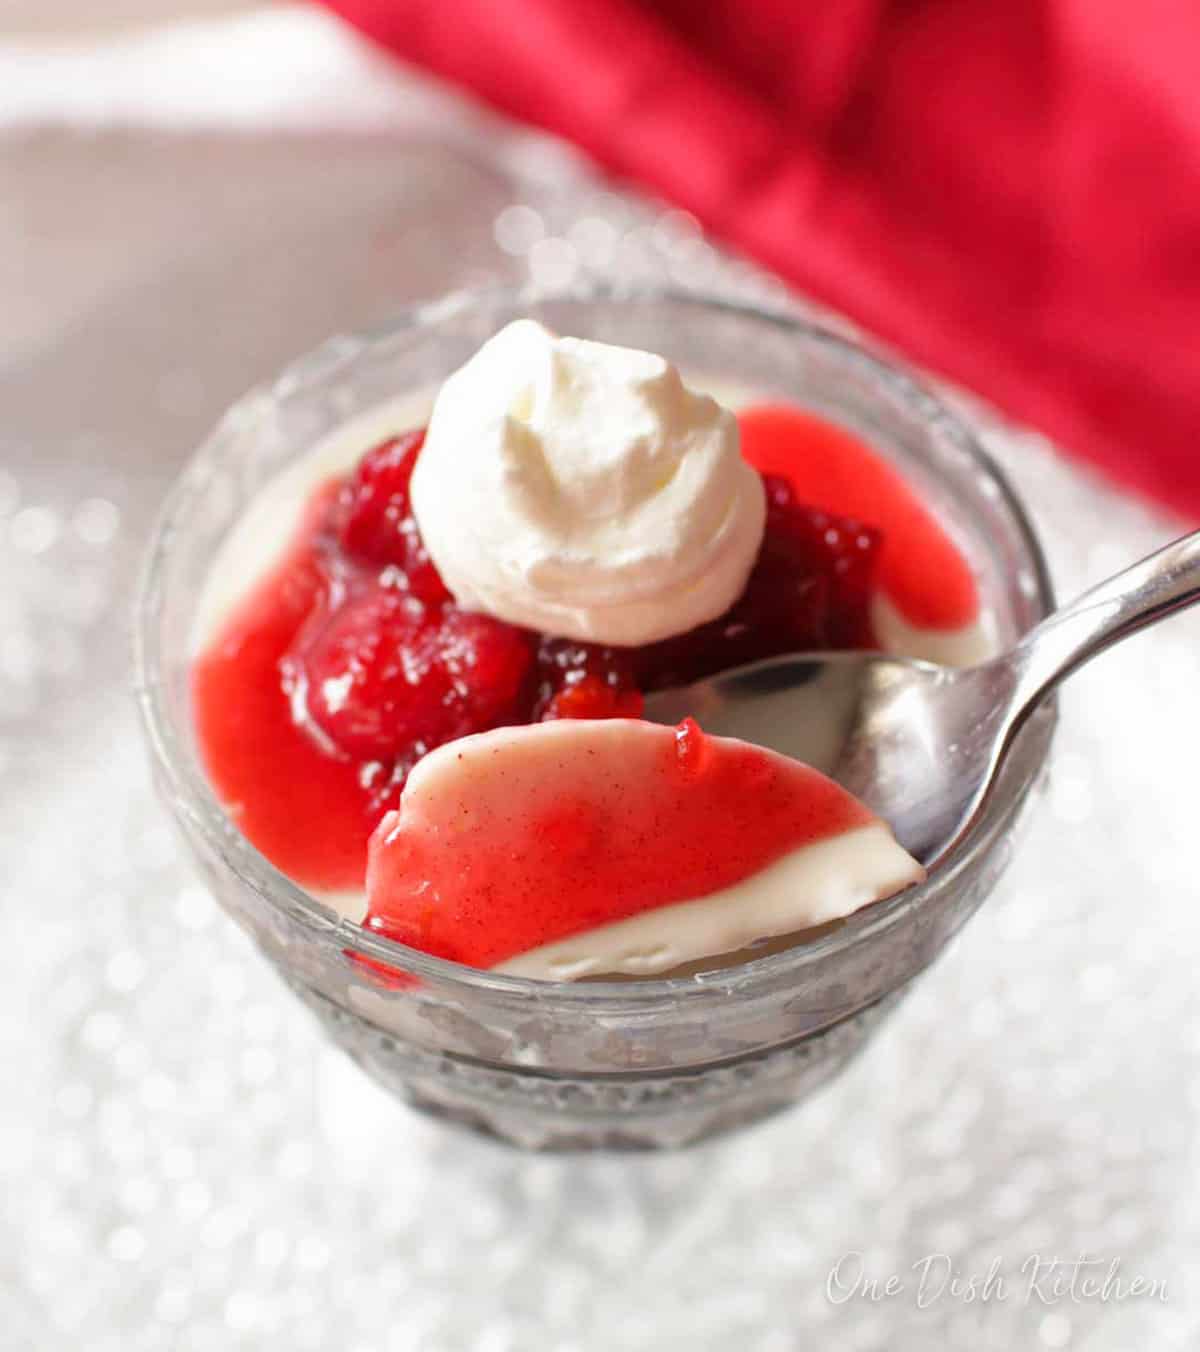 panna cotta in a dessert dish with a spoon on the side.